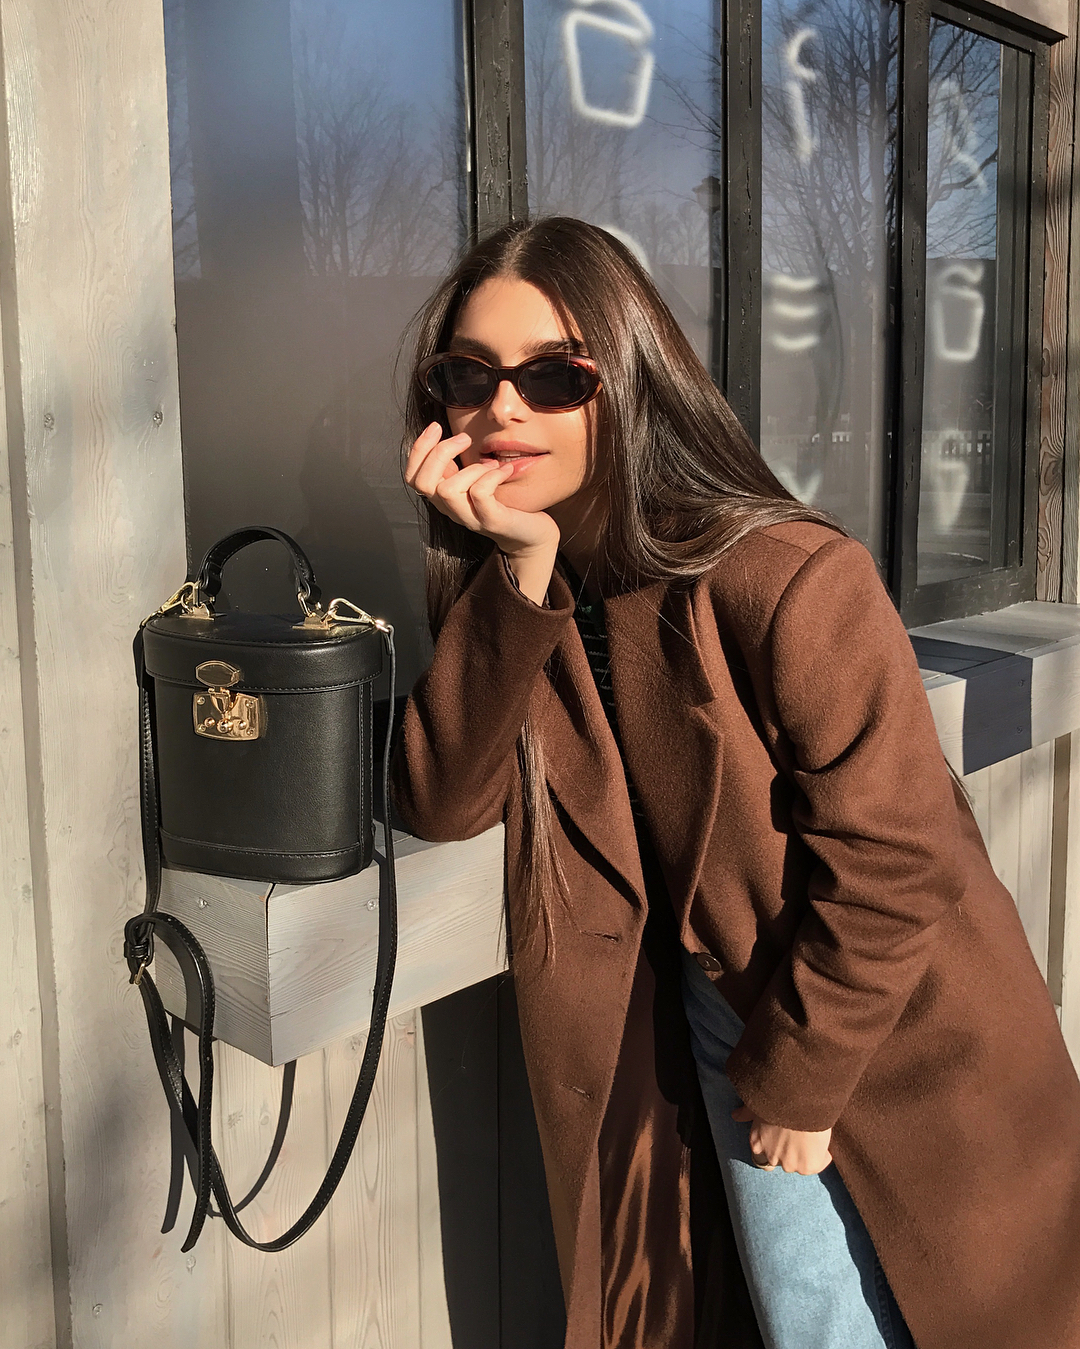 25 Stylish Brown Coats and Jackets for Your Fall and Winter Outfits — @mariecher Maria Chervotkina in a brown coat, Mark Cross top-handle bag, classic jeans, and oval sunglasses